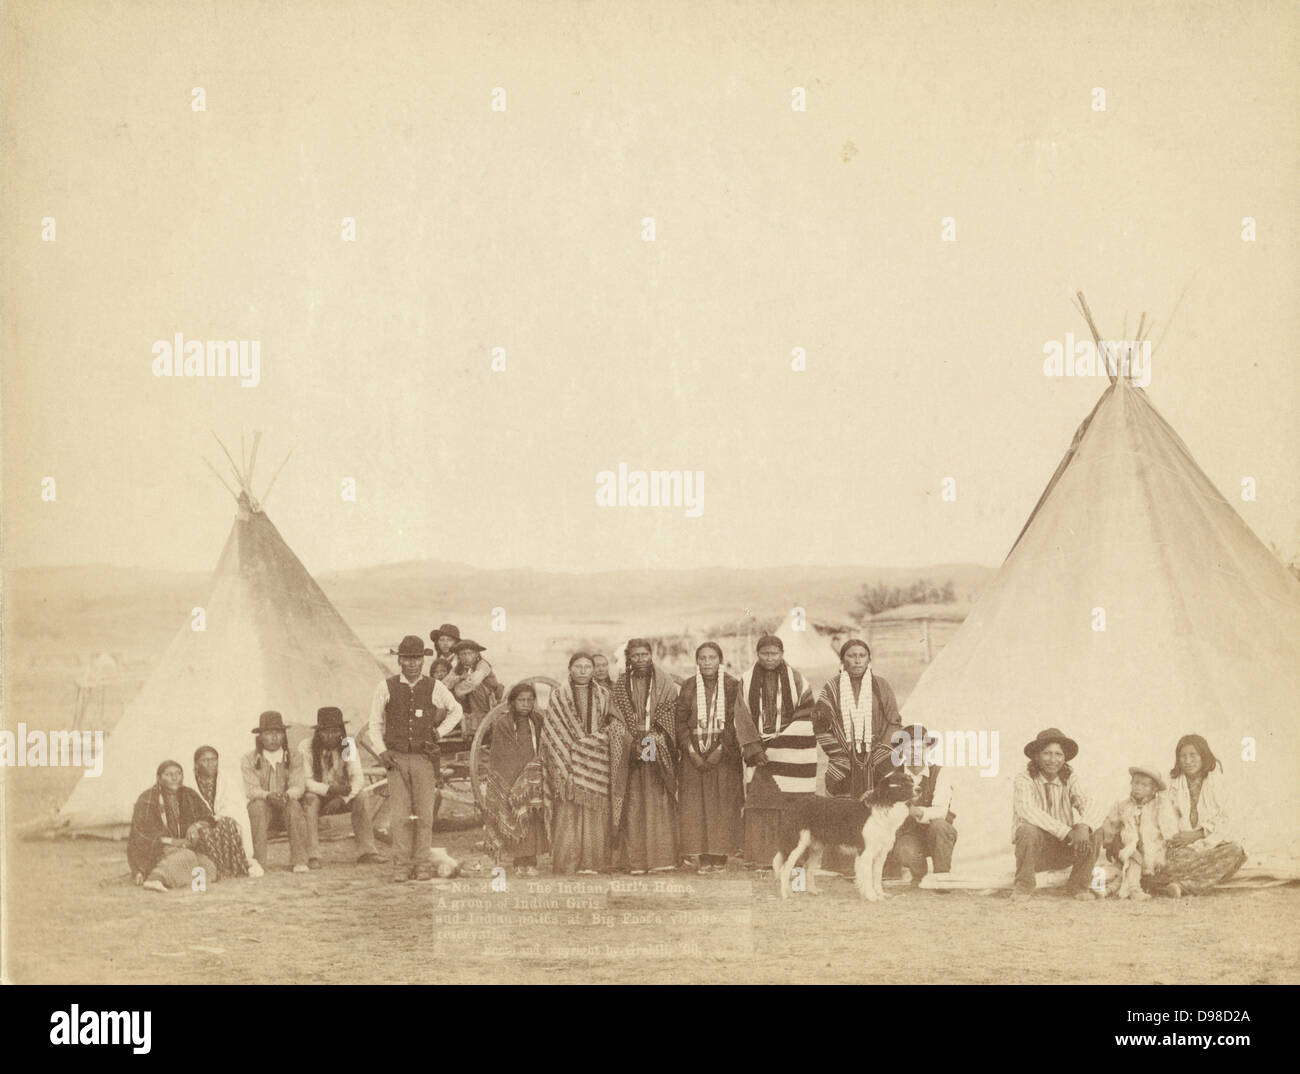 The Indian Girl's Home. A group of Indian girls and Indian police at Big Foot's village on reservation, 1900. Photograph by John C. H.Grabill (active 1887-1900). Stock Photo